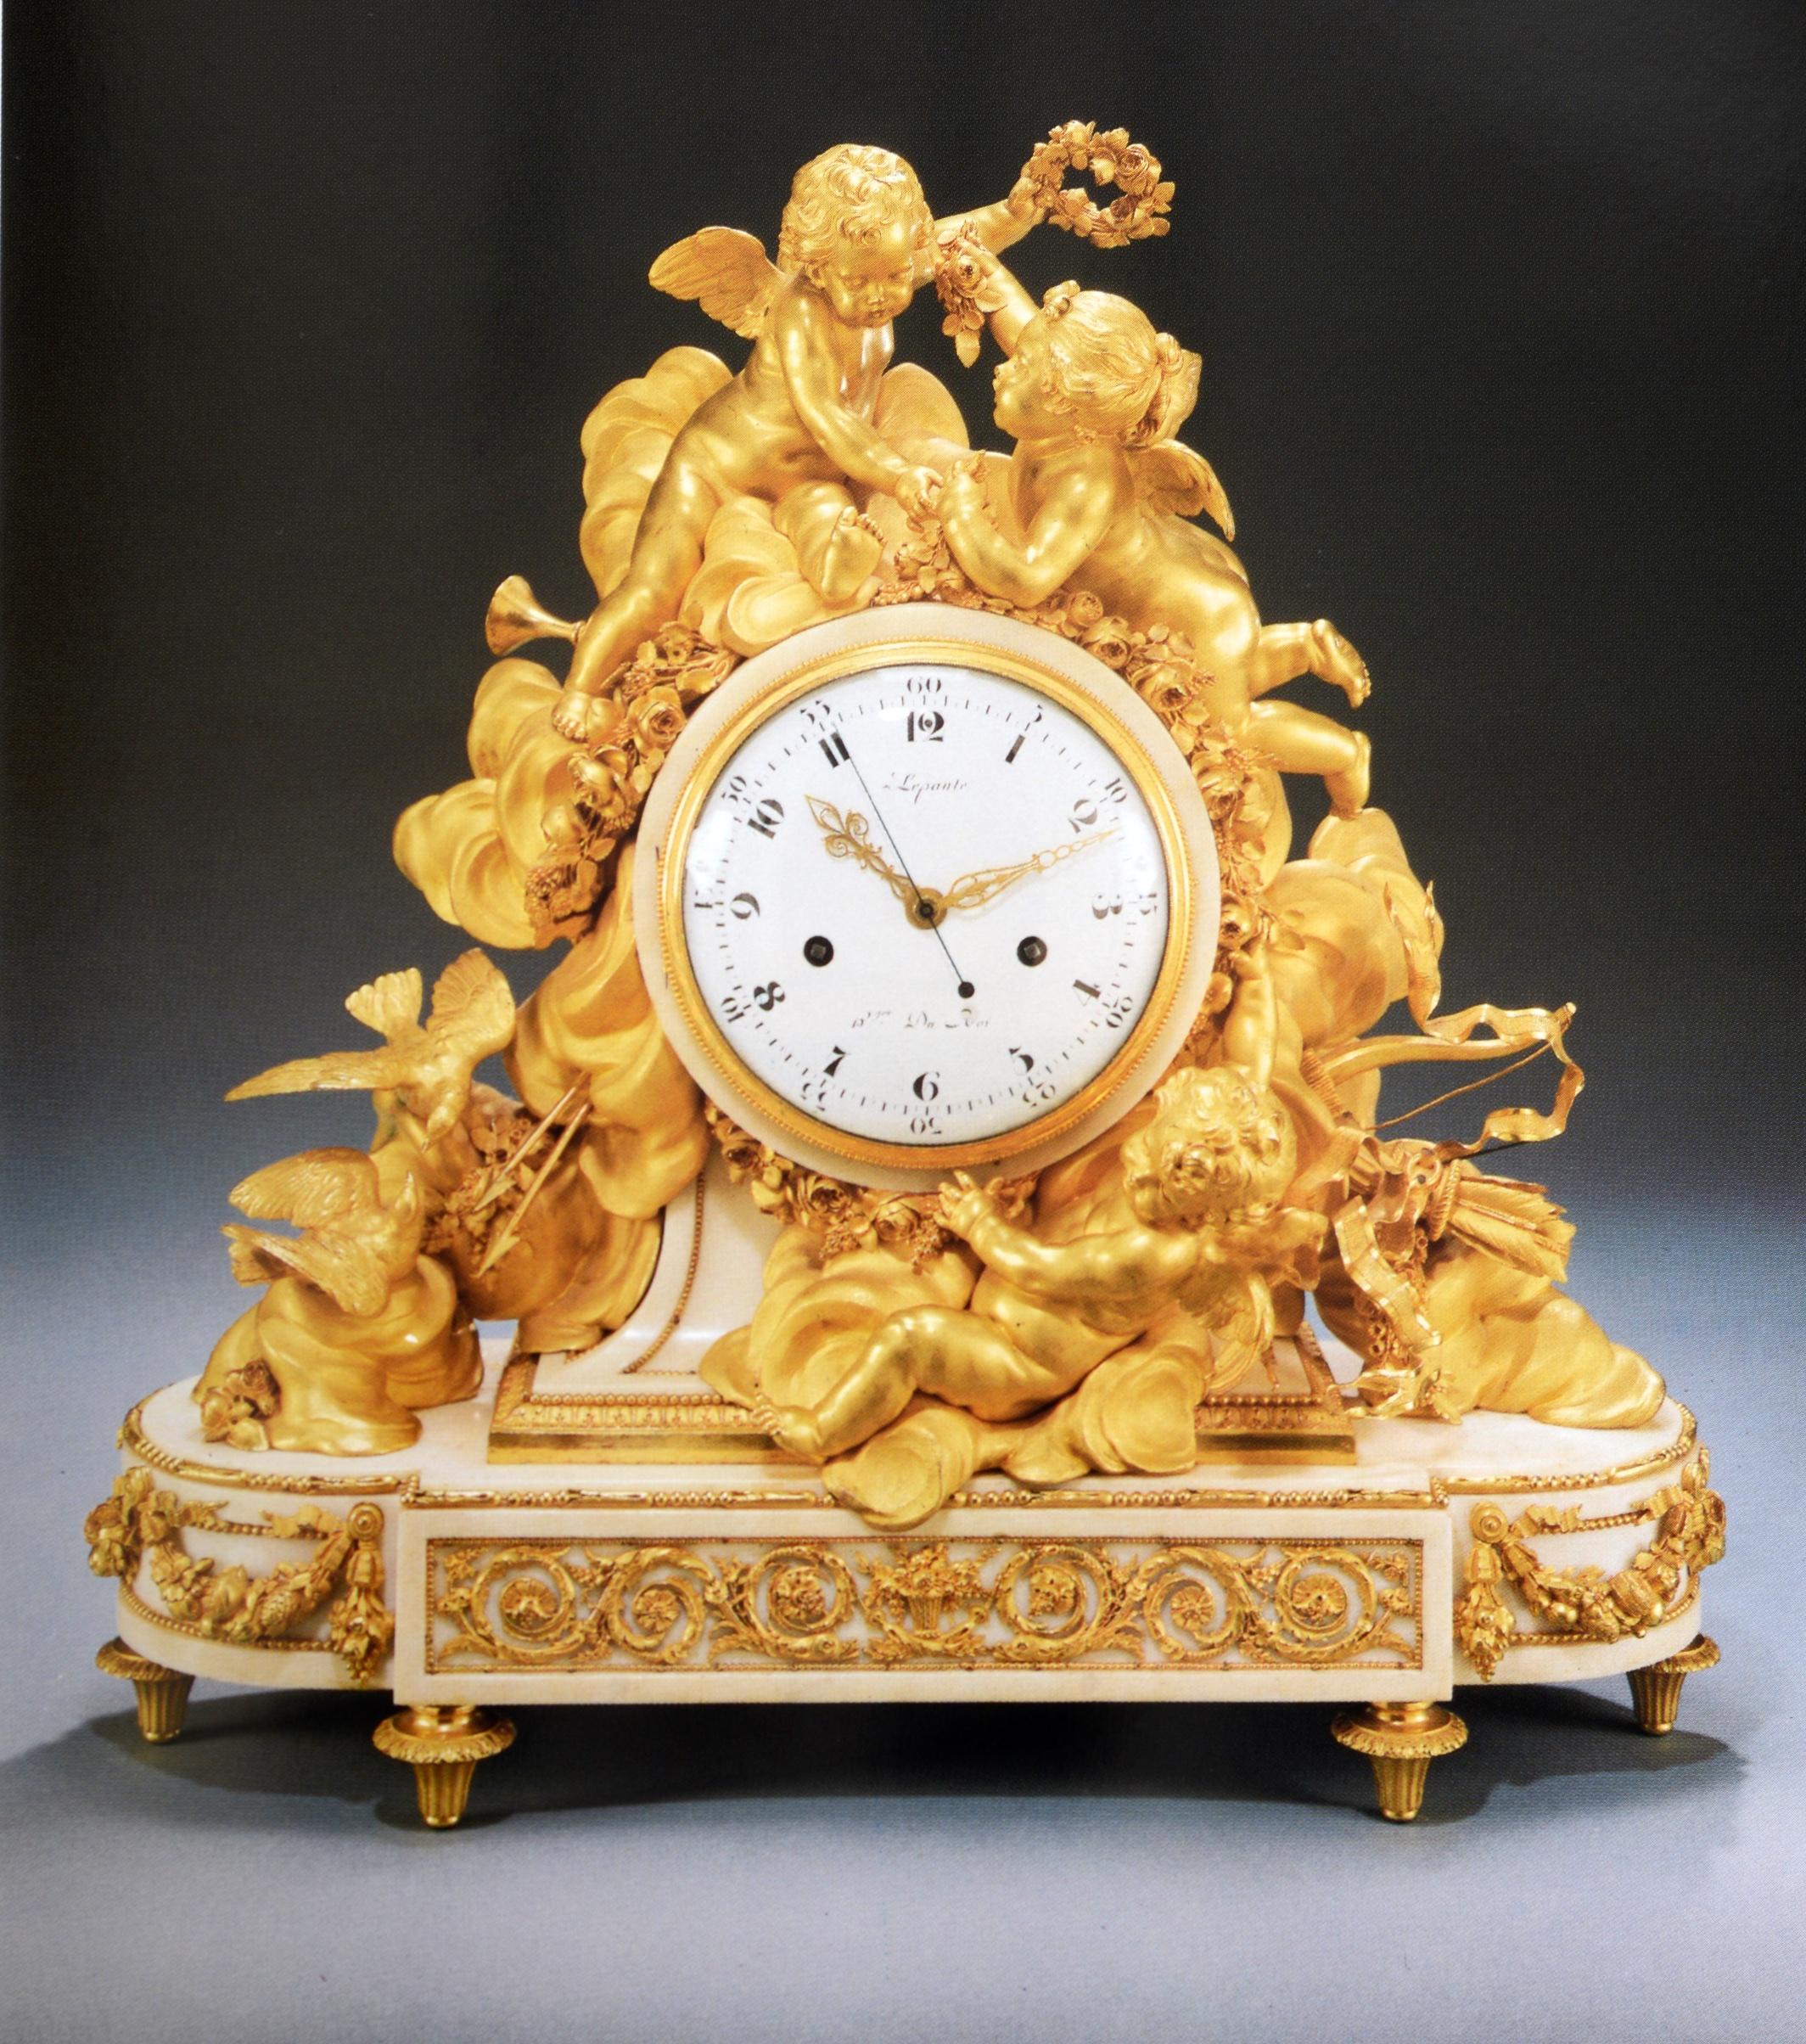 Paper Sotheby's, Highly Important French Furniture from a Private Collection, 1993 For Sale